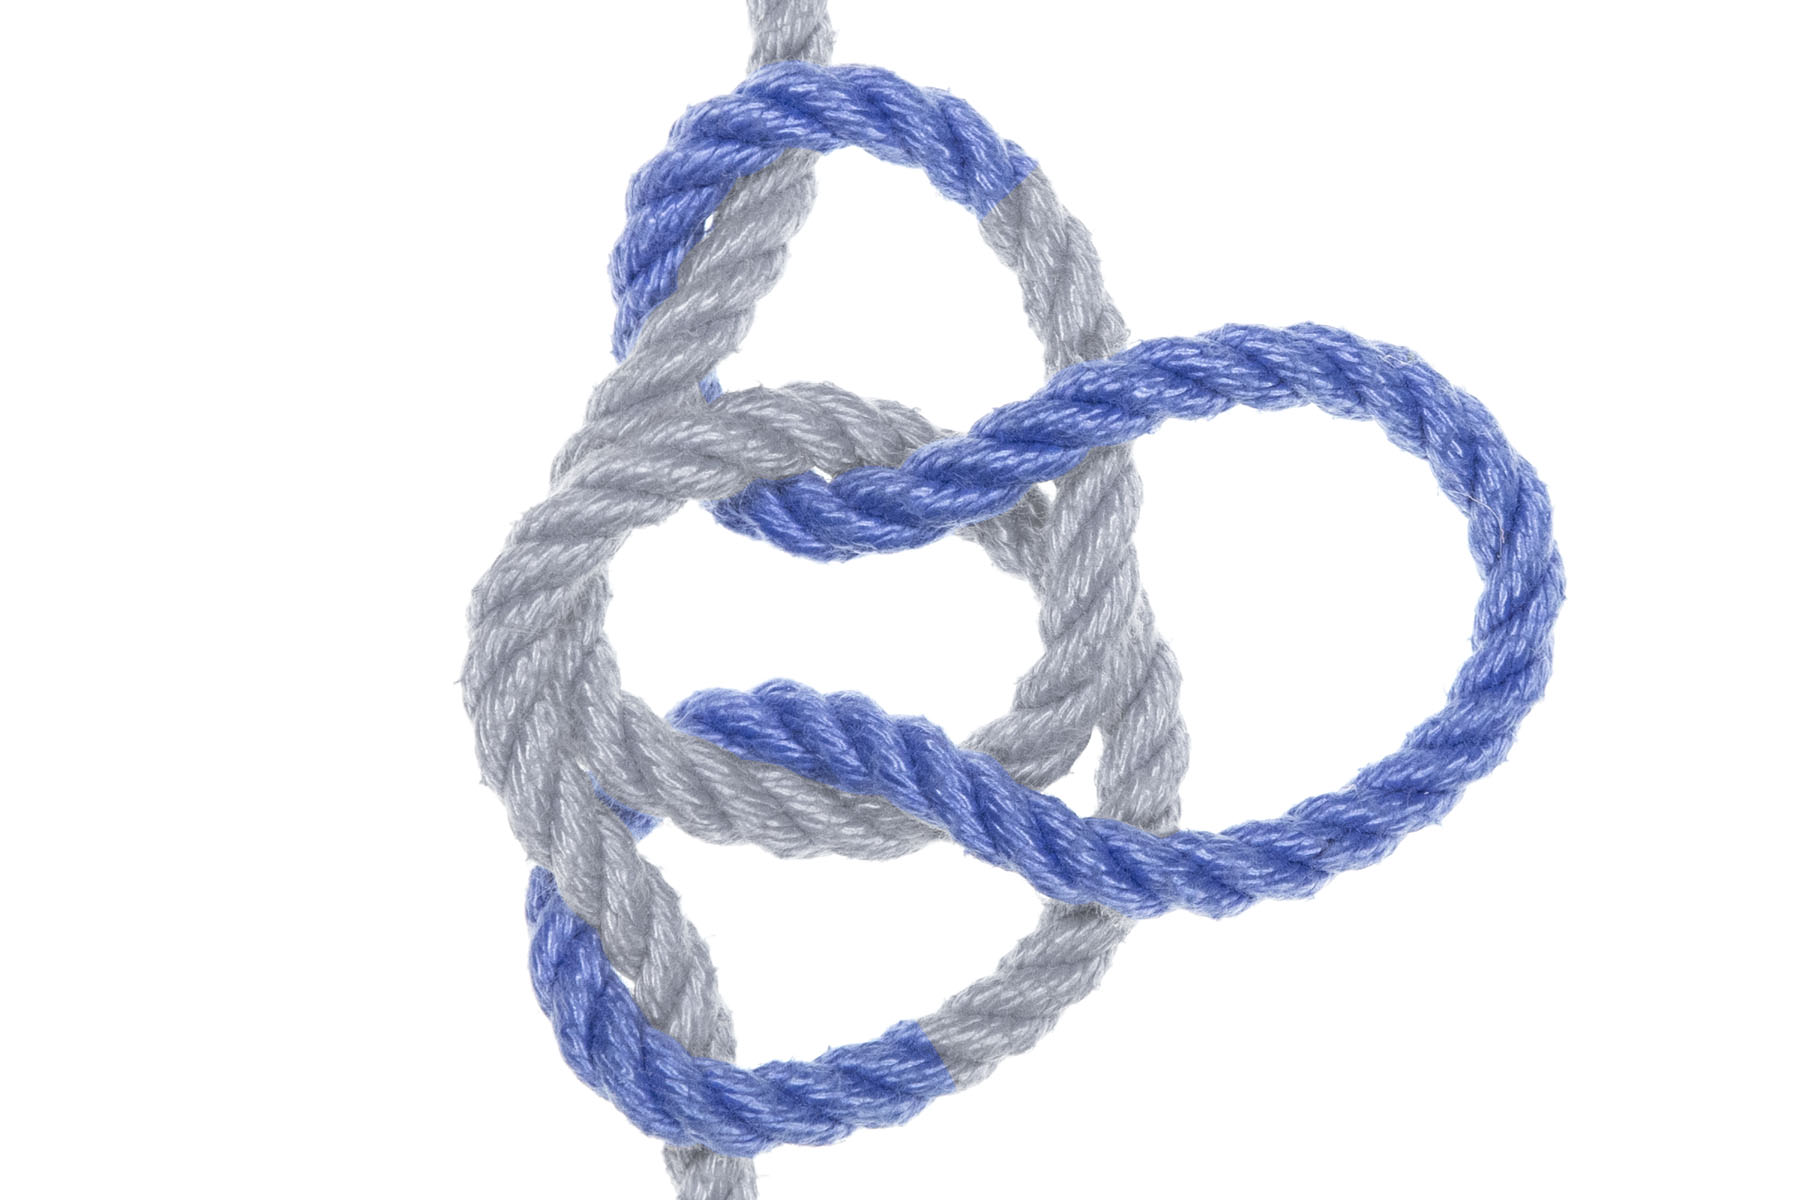 The part of the bight that faced to the left is has been pulled through the small space between the first and second twists. It crosses under the first twist, comes up between them, and crosses over the second twist.